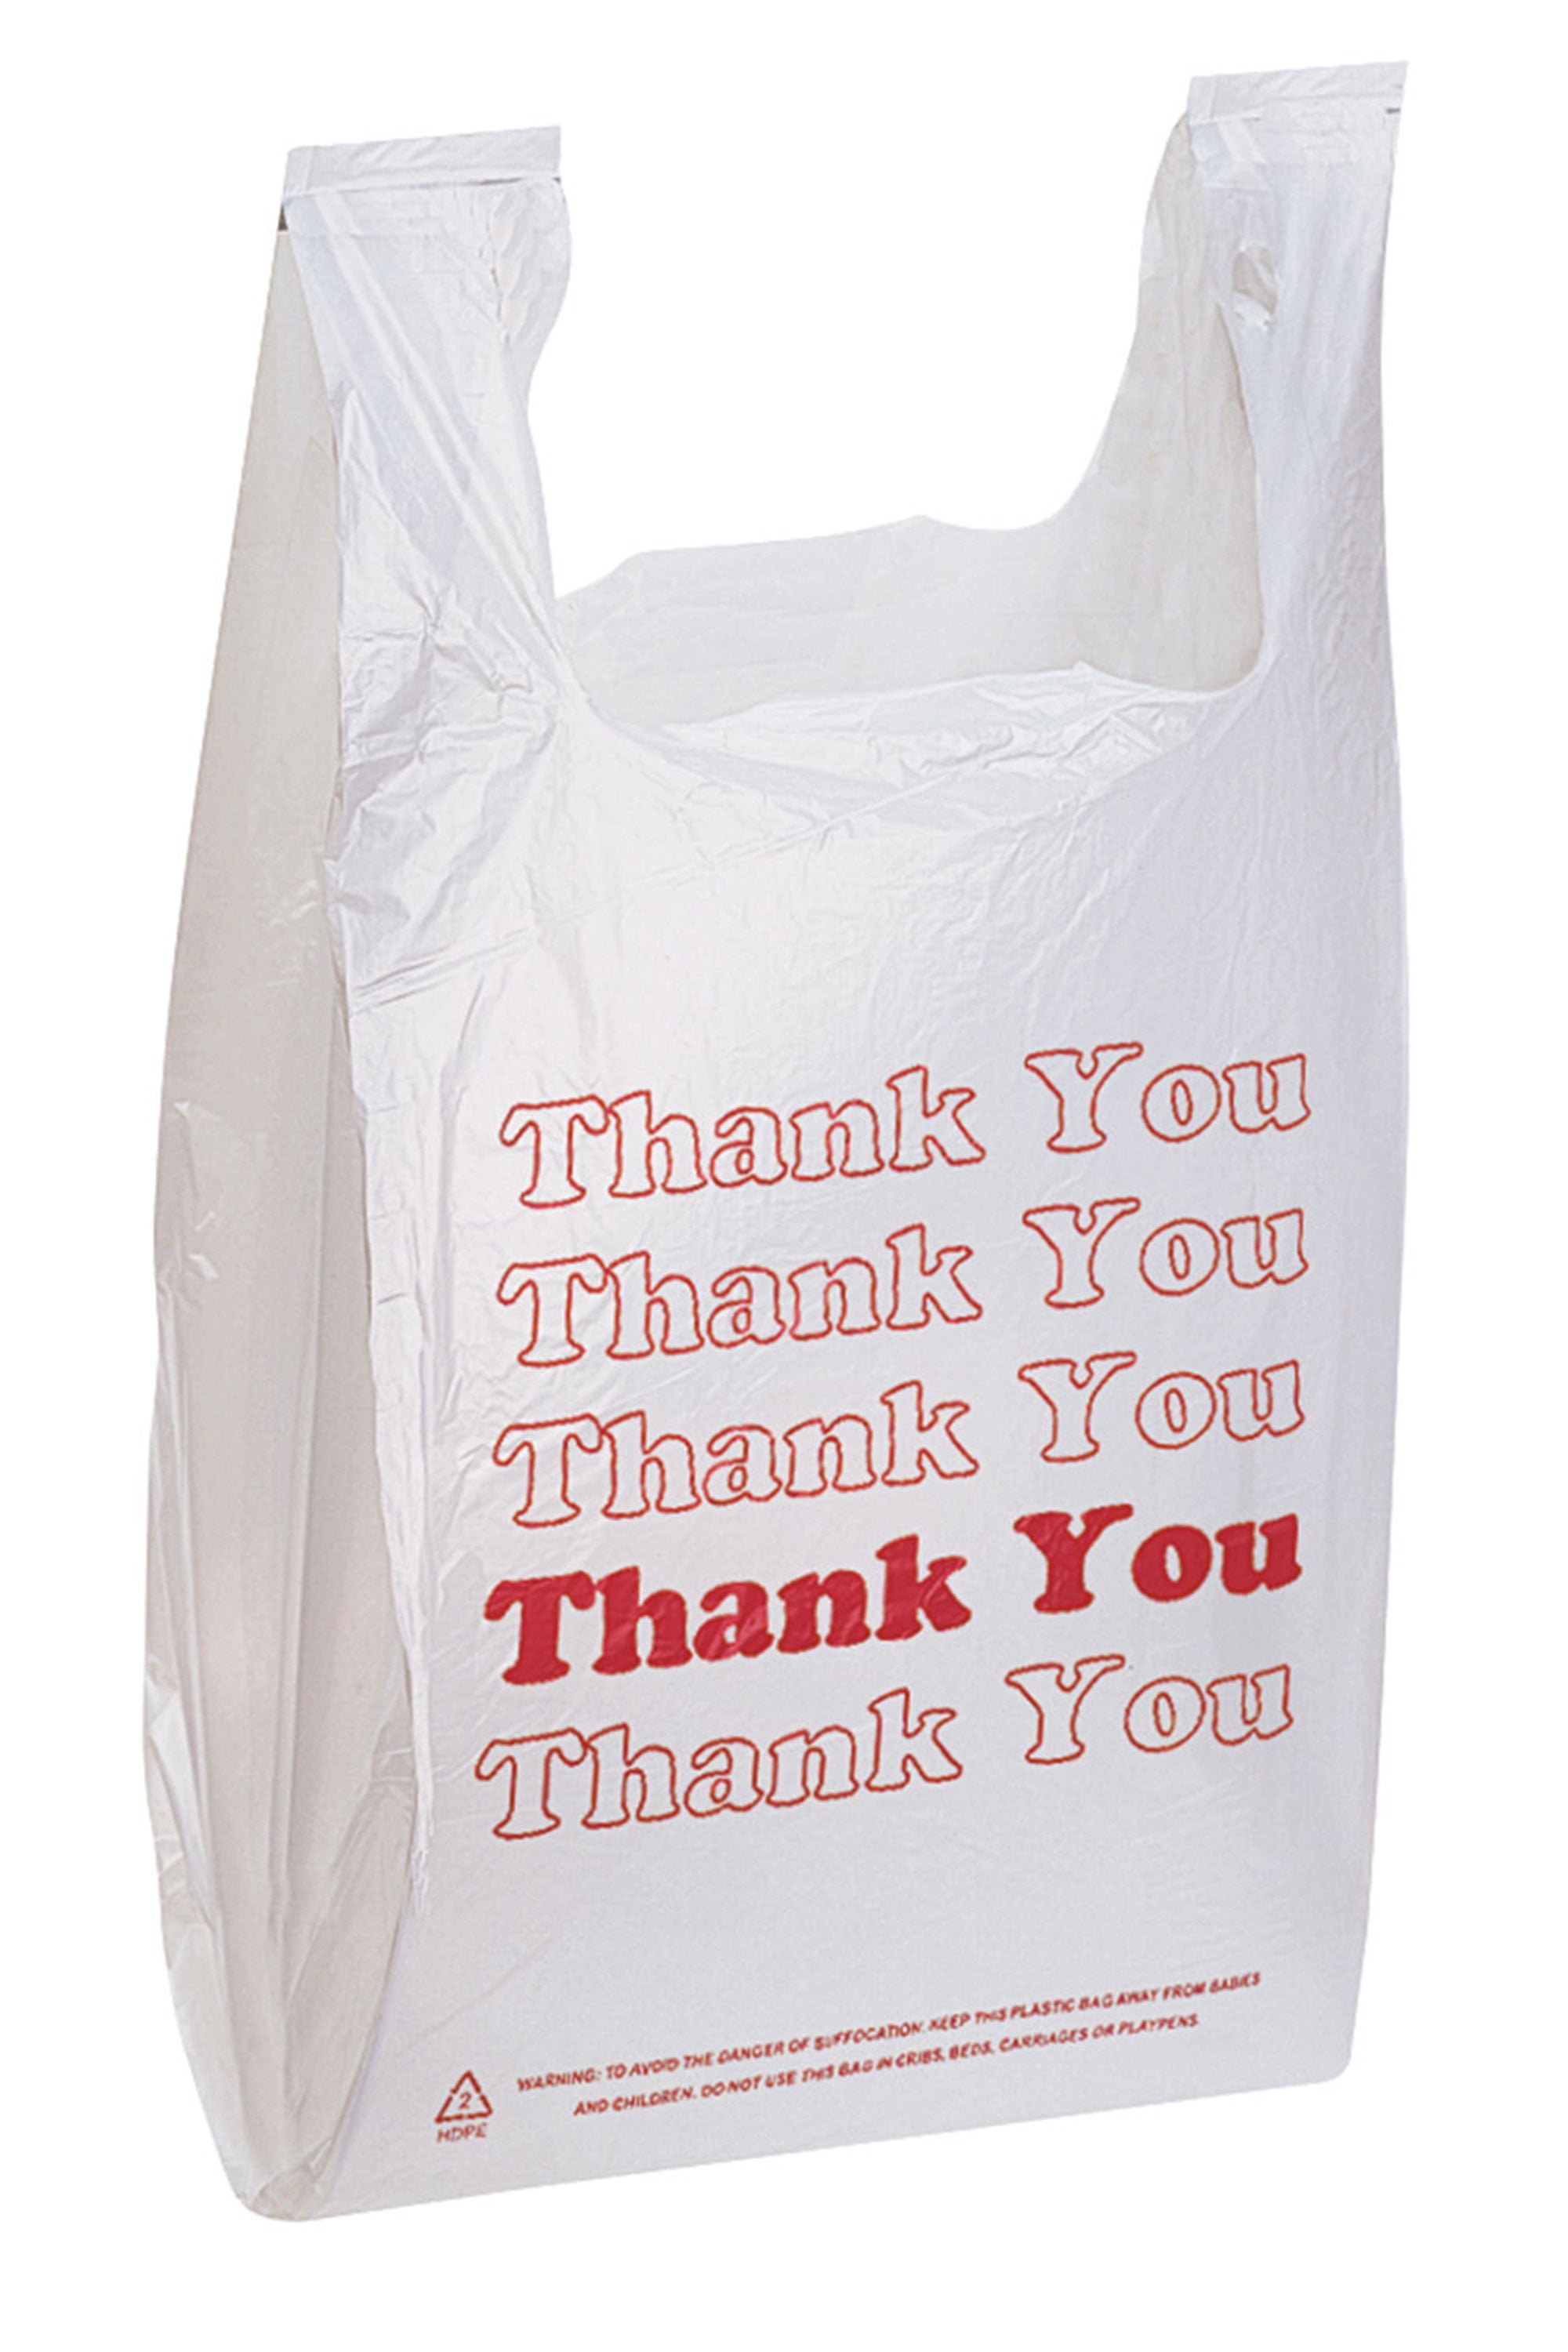 100 Self Adhesive Cookie Bags Thank You Design Lovely Bulk Wholesale Favor Gift 